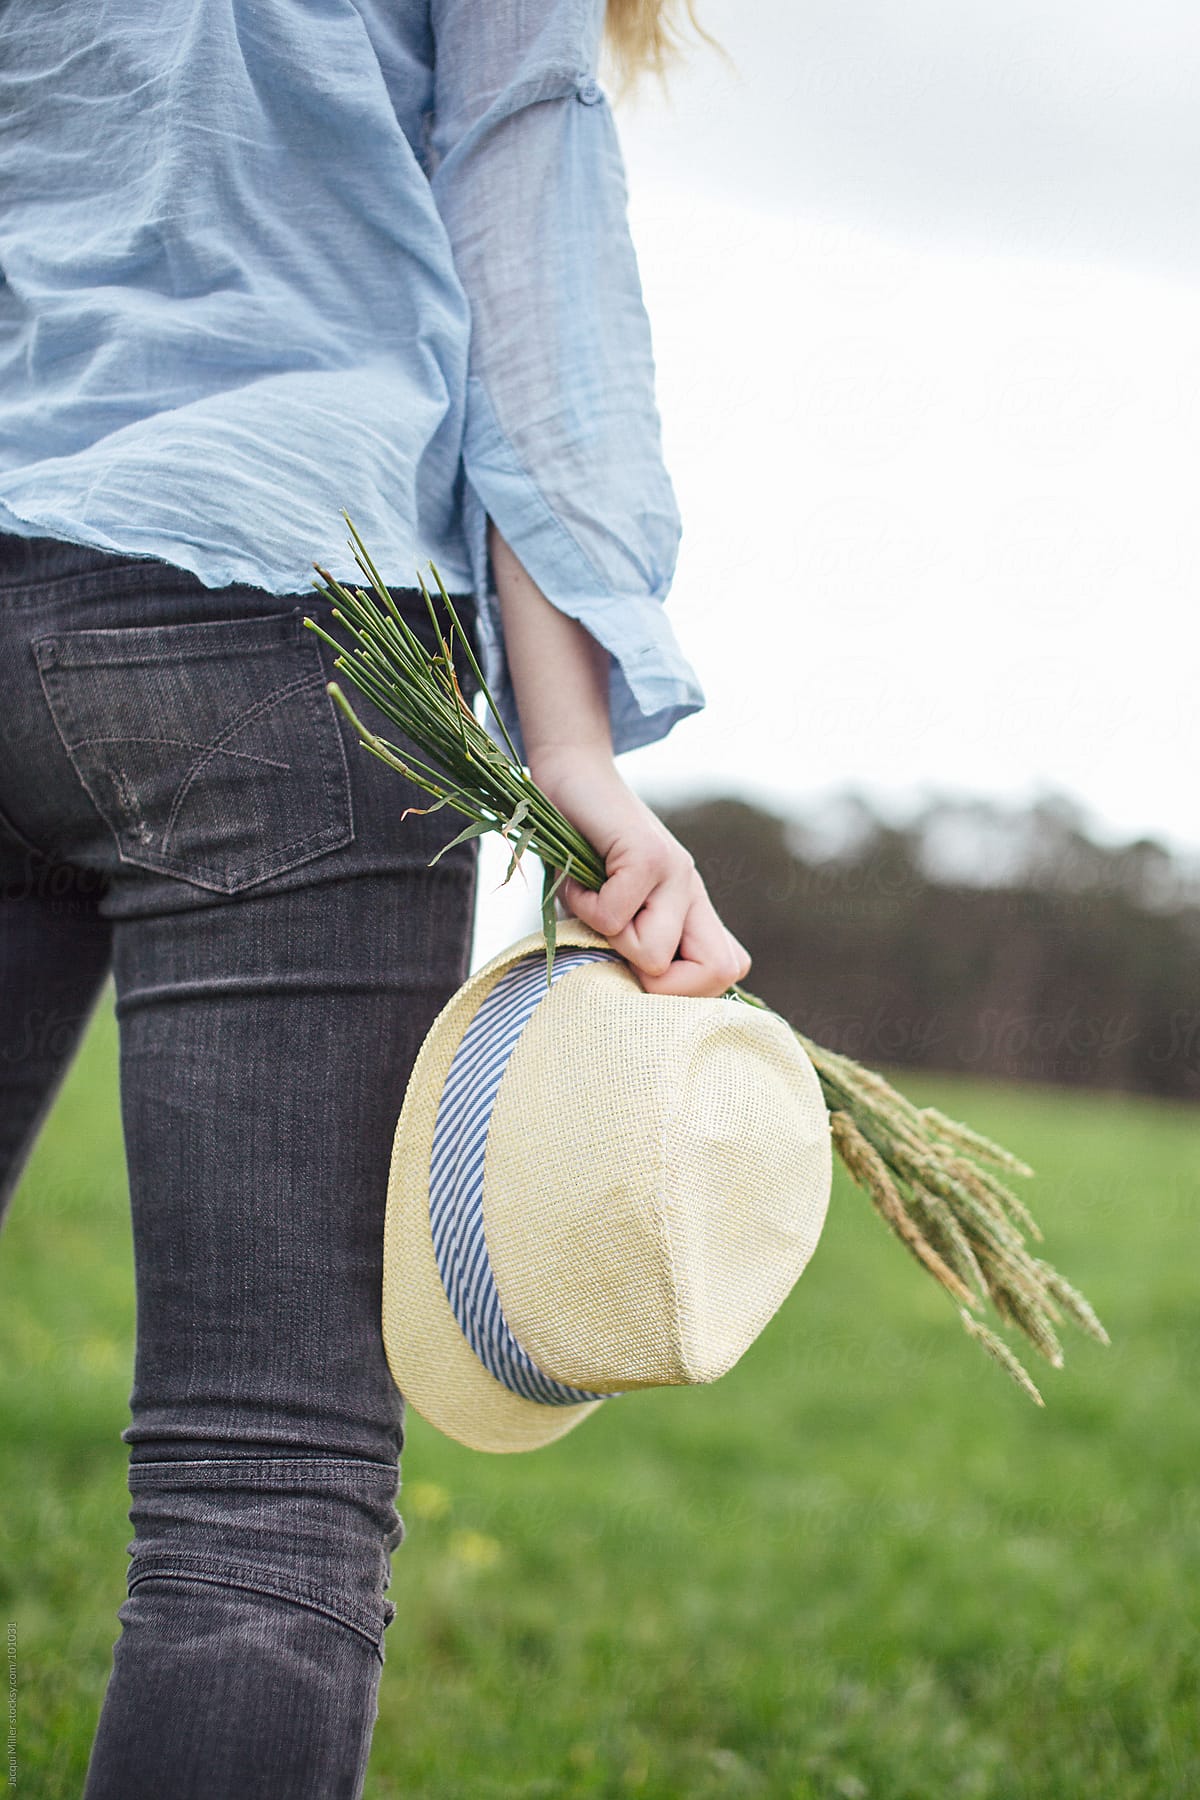 Back View Of Girl In Field Holding Flowers And Hat By Stocksy Contributor Jacqui Miller